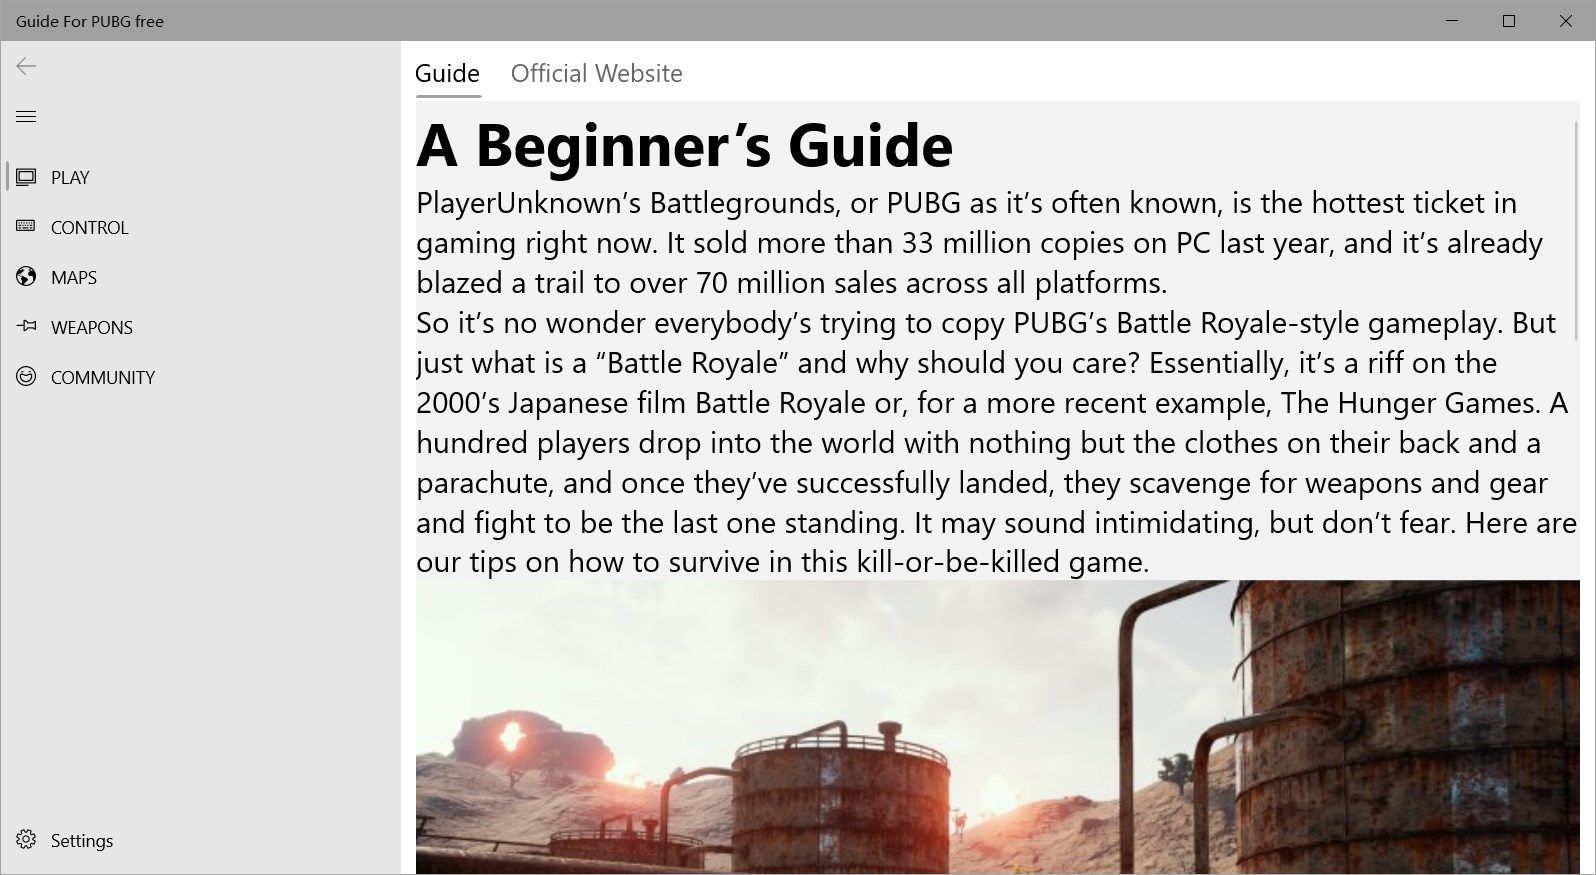 Guide for a Cool Battle royale game